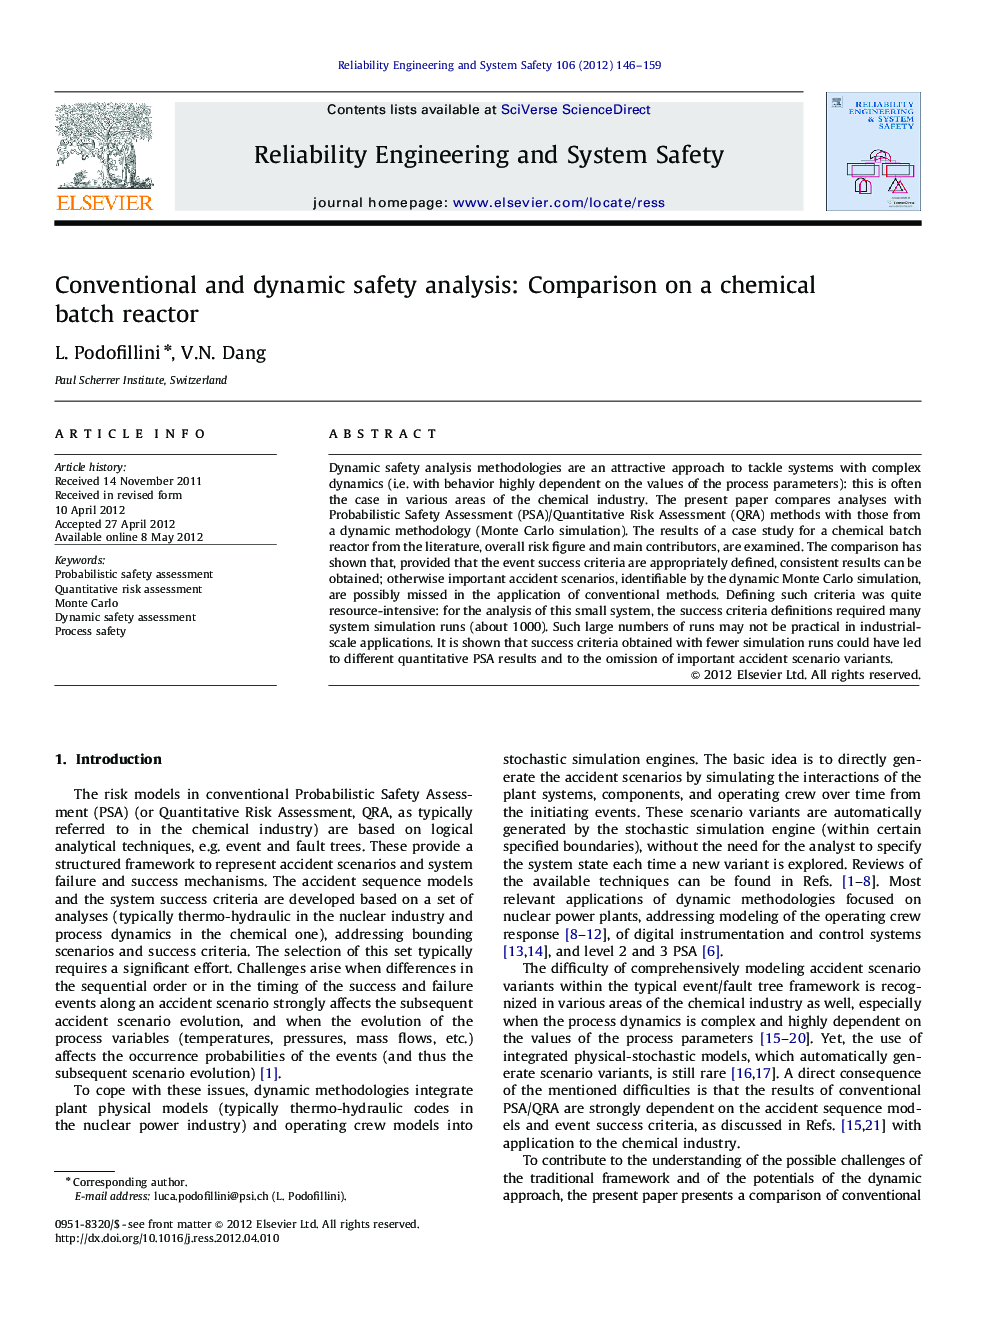 Conventional and dynamic safety analysis: Comparison on a chemical batch reactor